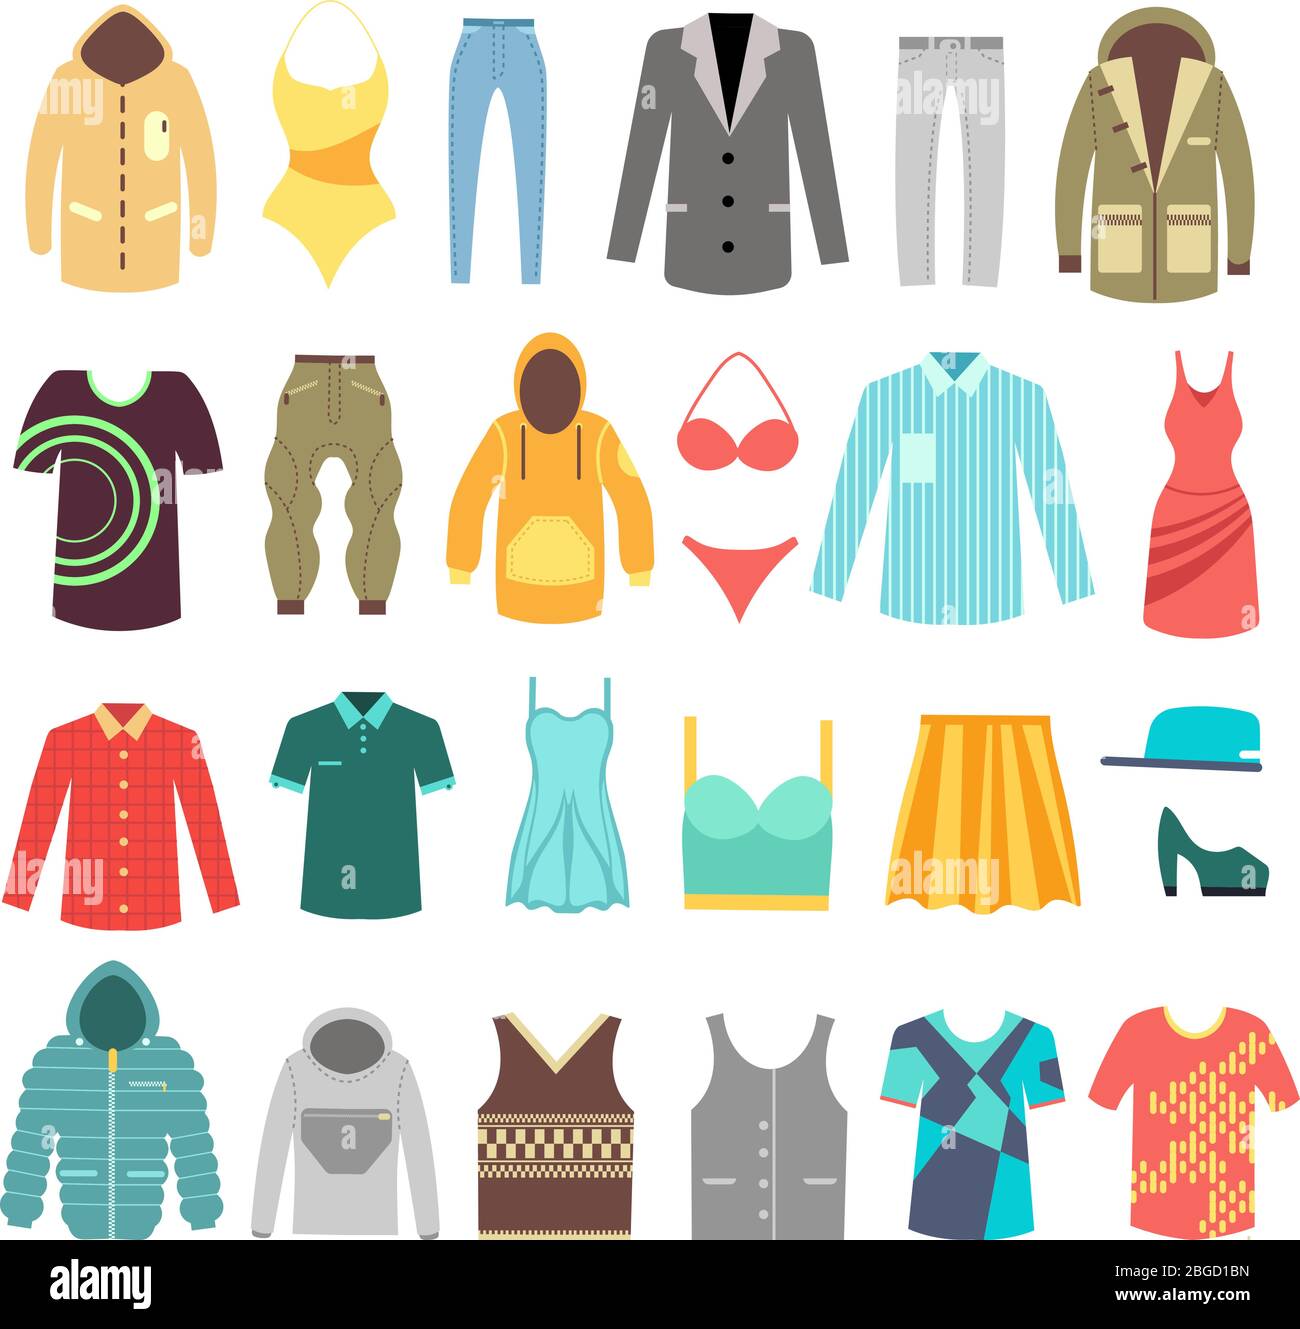 People In Old Fashion Clothing Vector Illustration Set. Cartoon